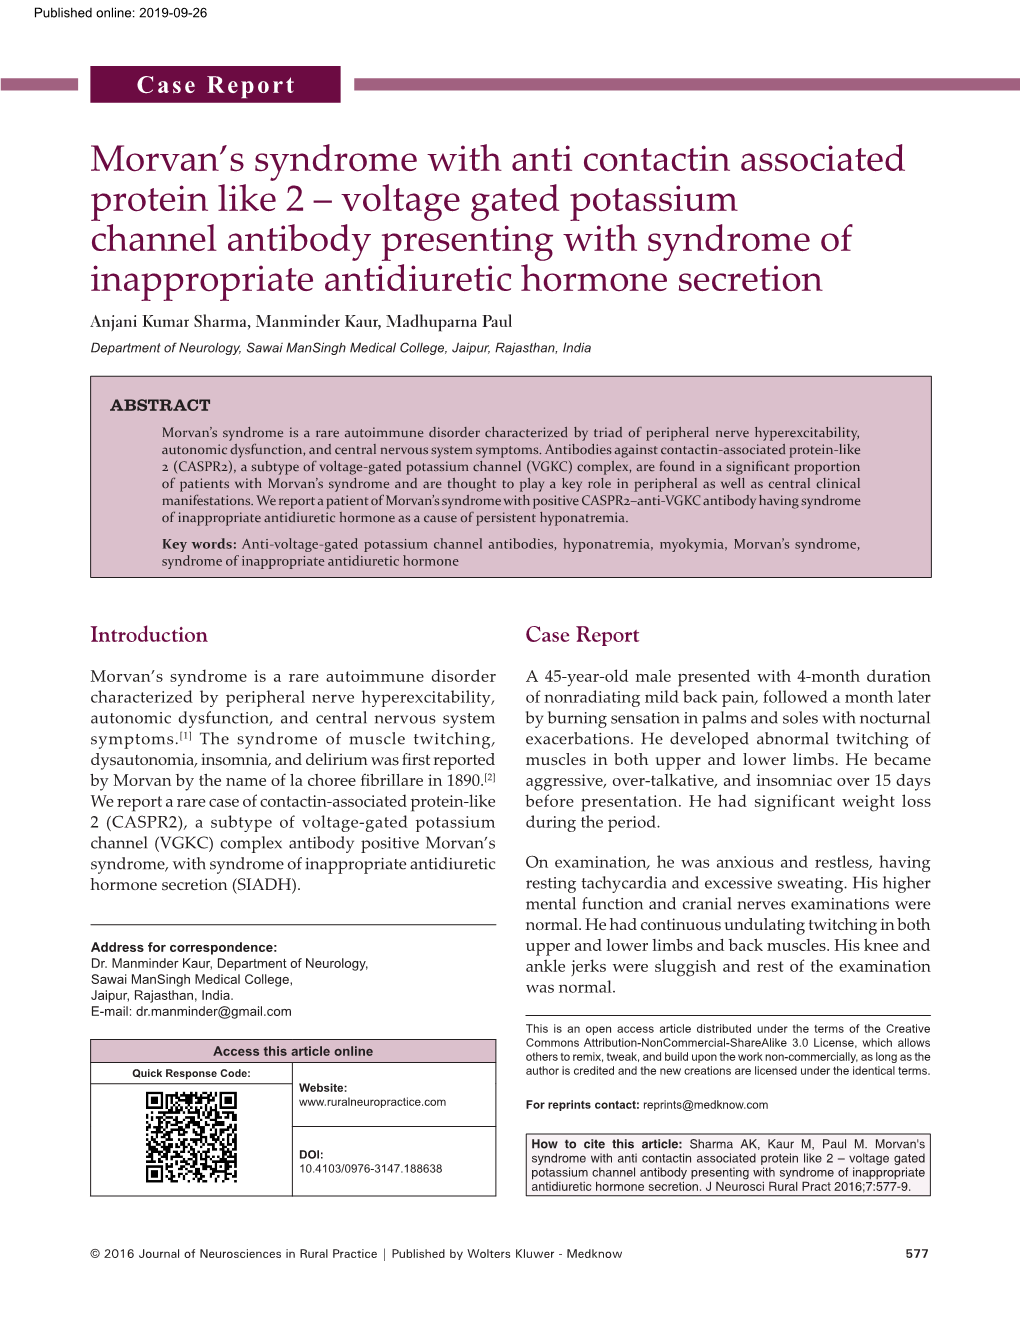 Voltage Gated Potassium Channel Antibody Presenting with S